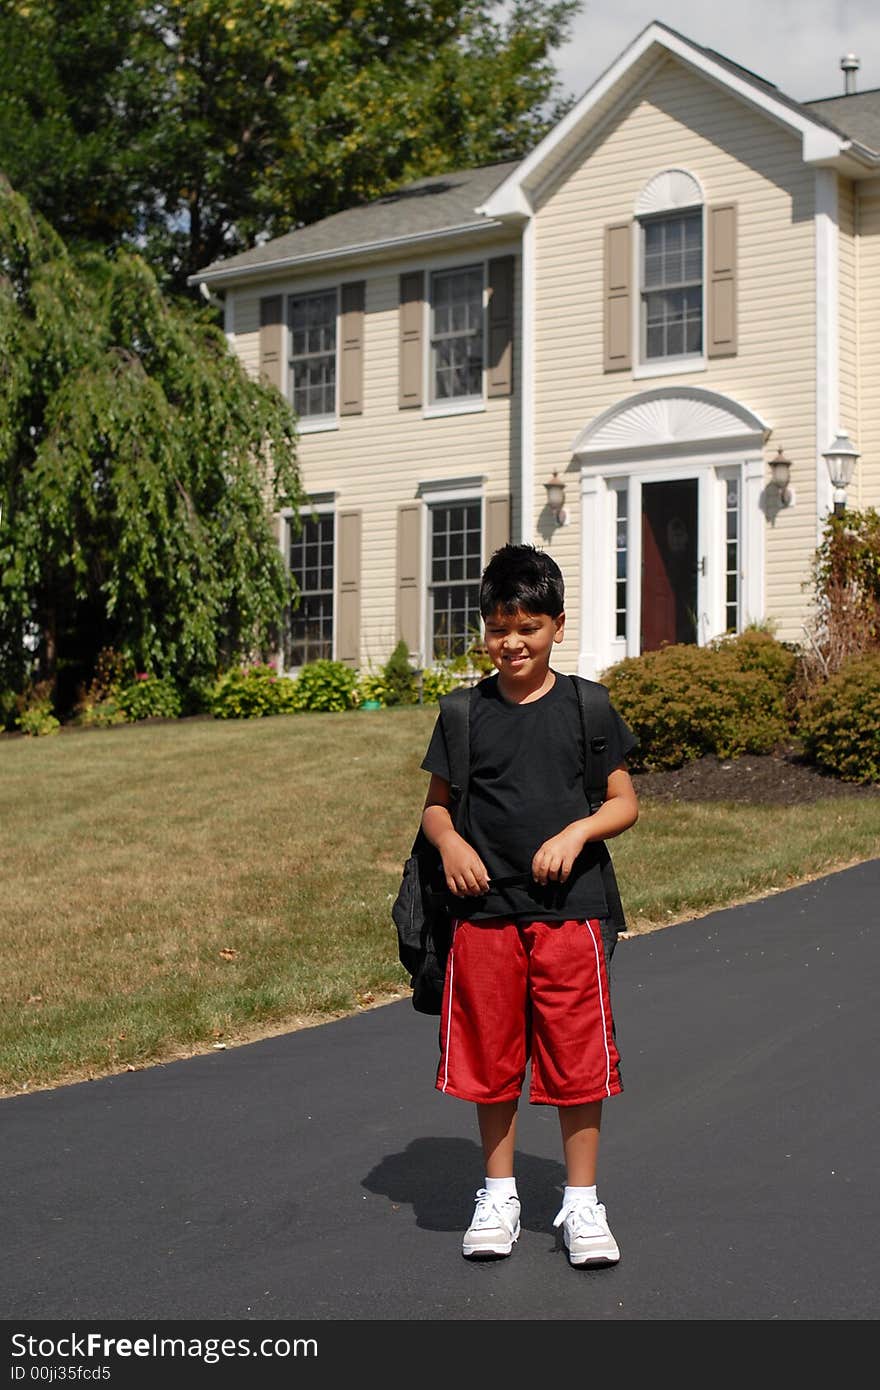 Elementary boy waiting for the school bus in front of his house.